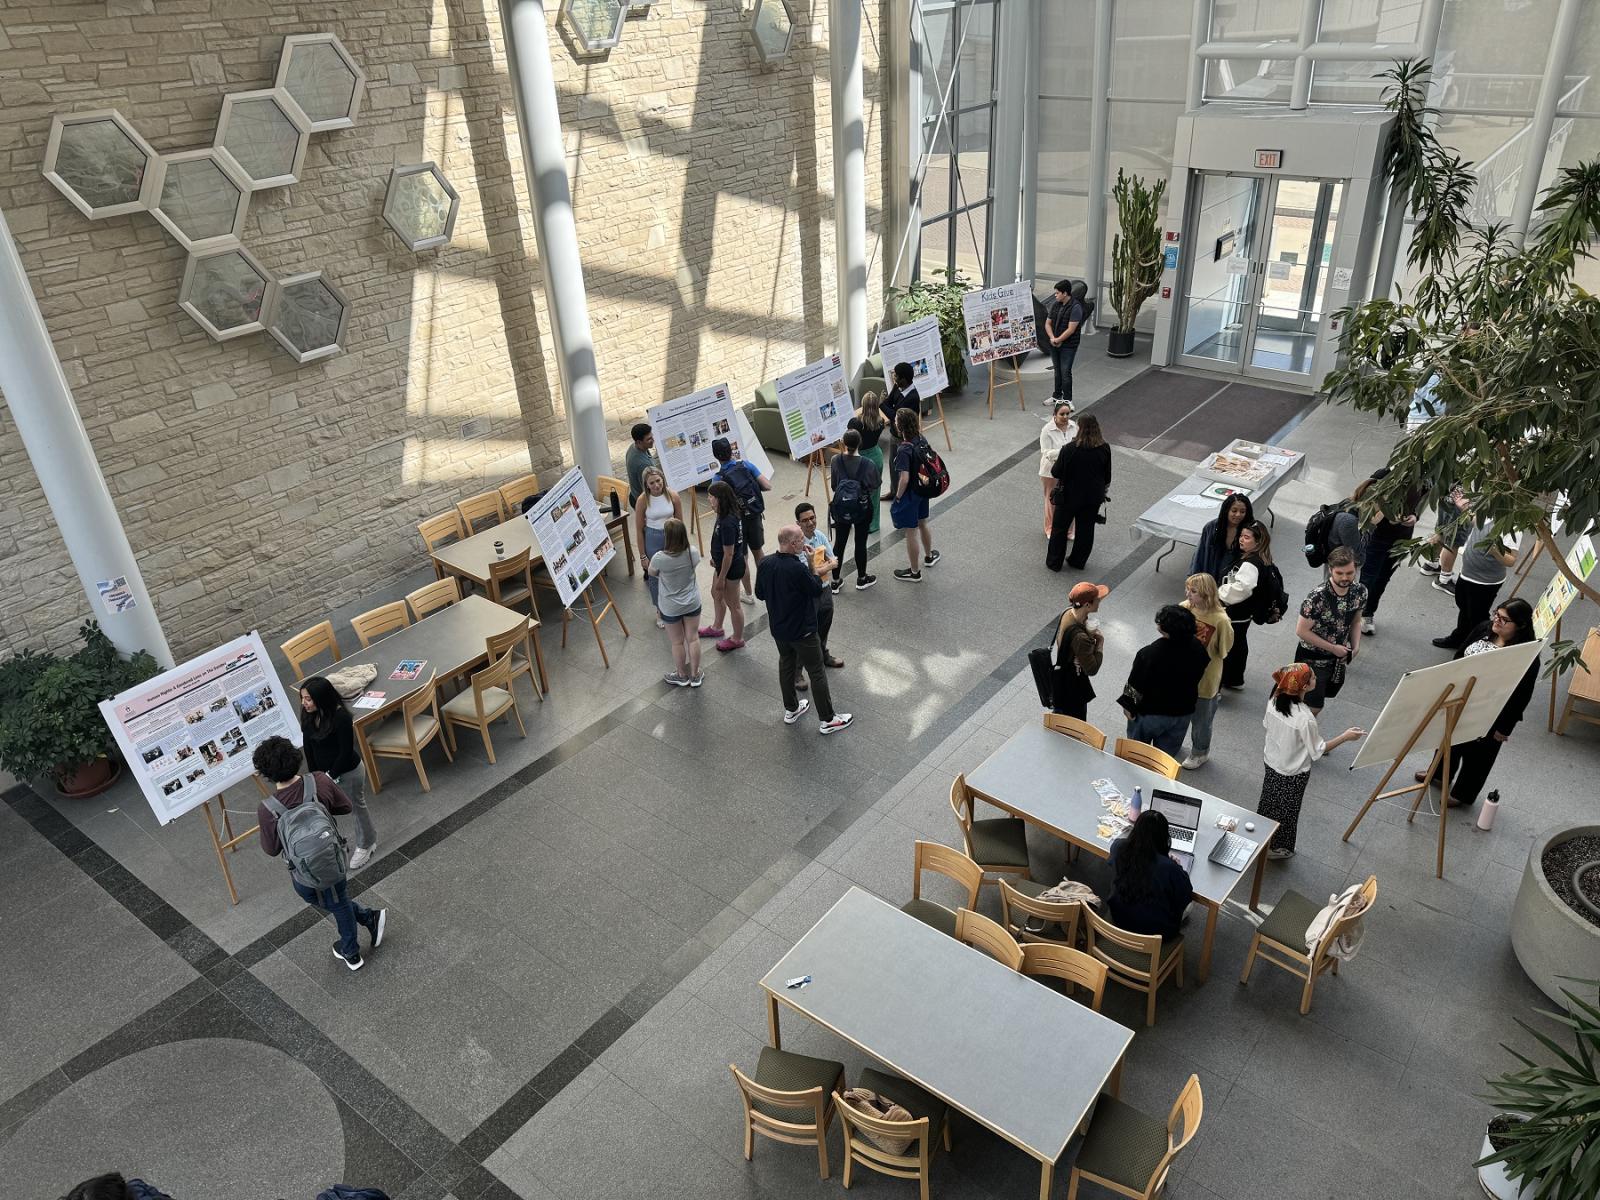 Students present their research posters in the Steitz Atrium during Spring Term.